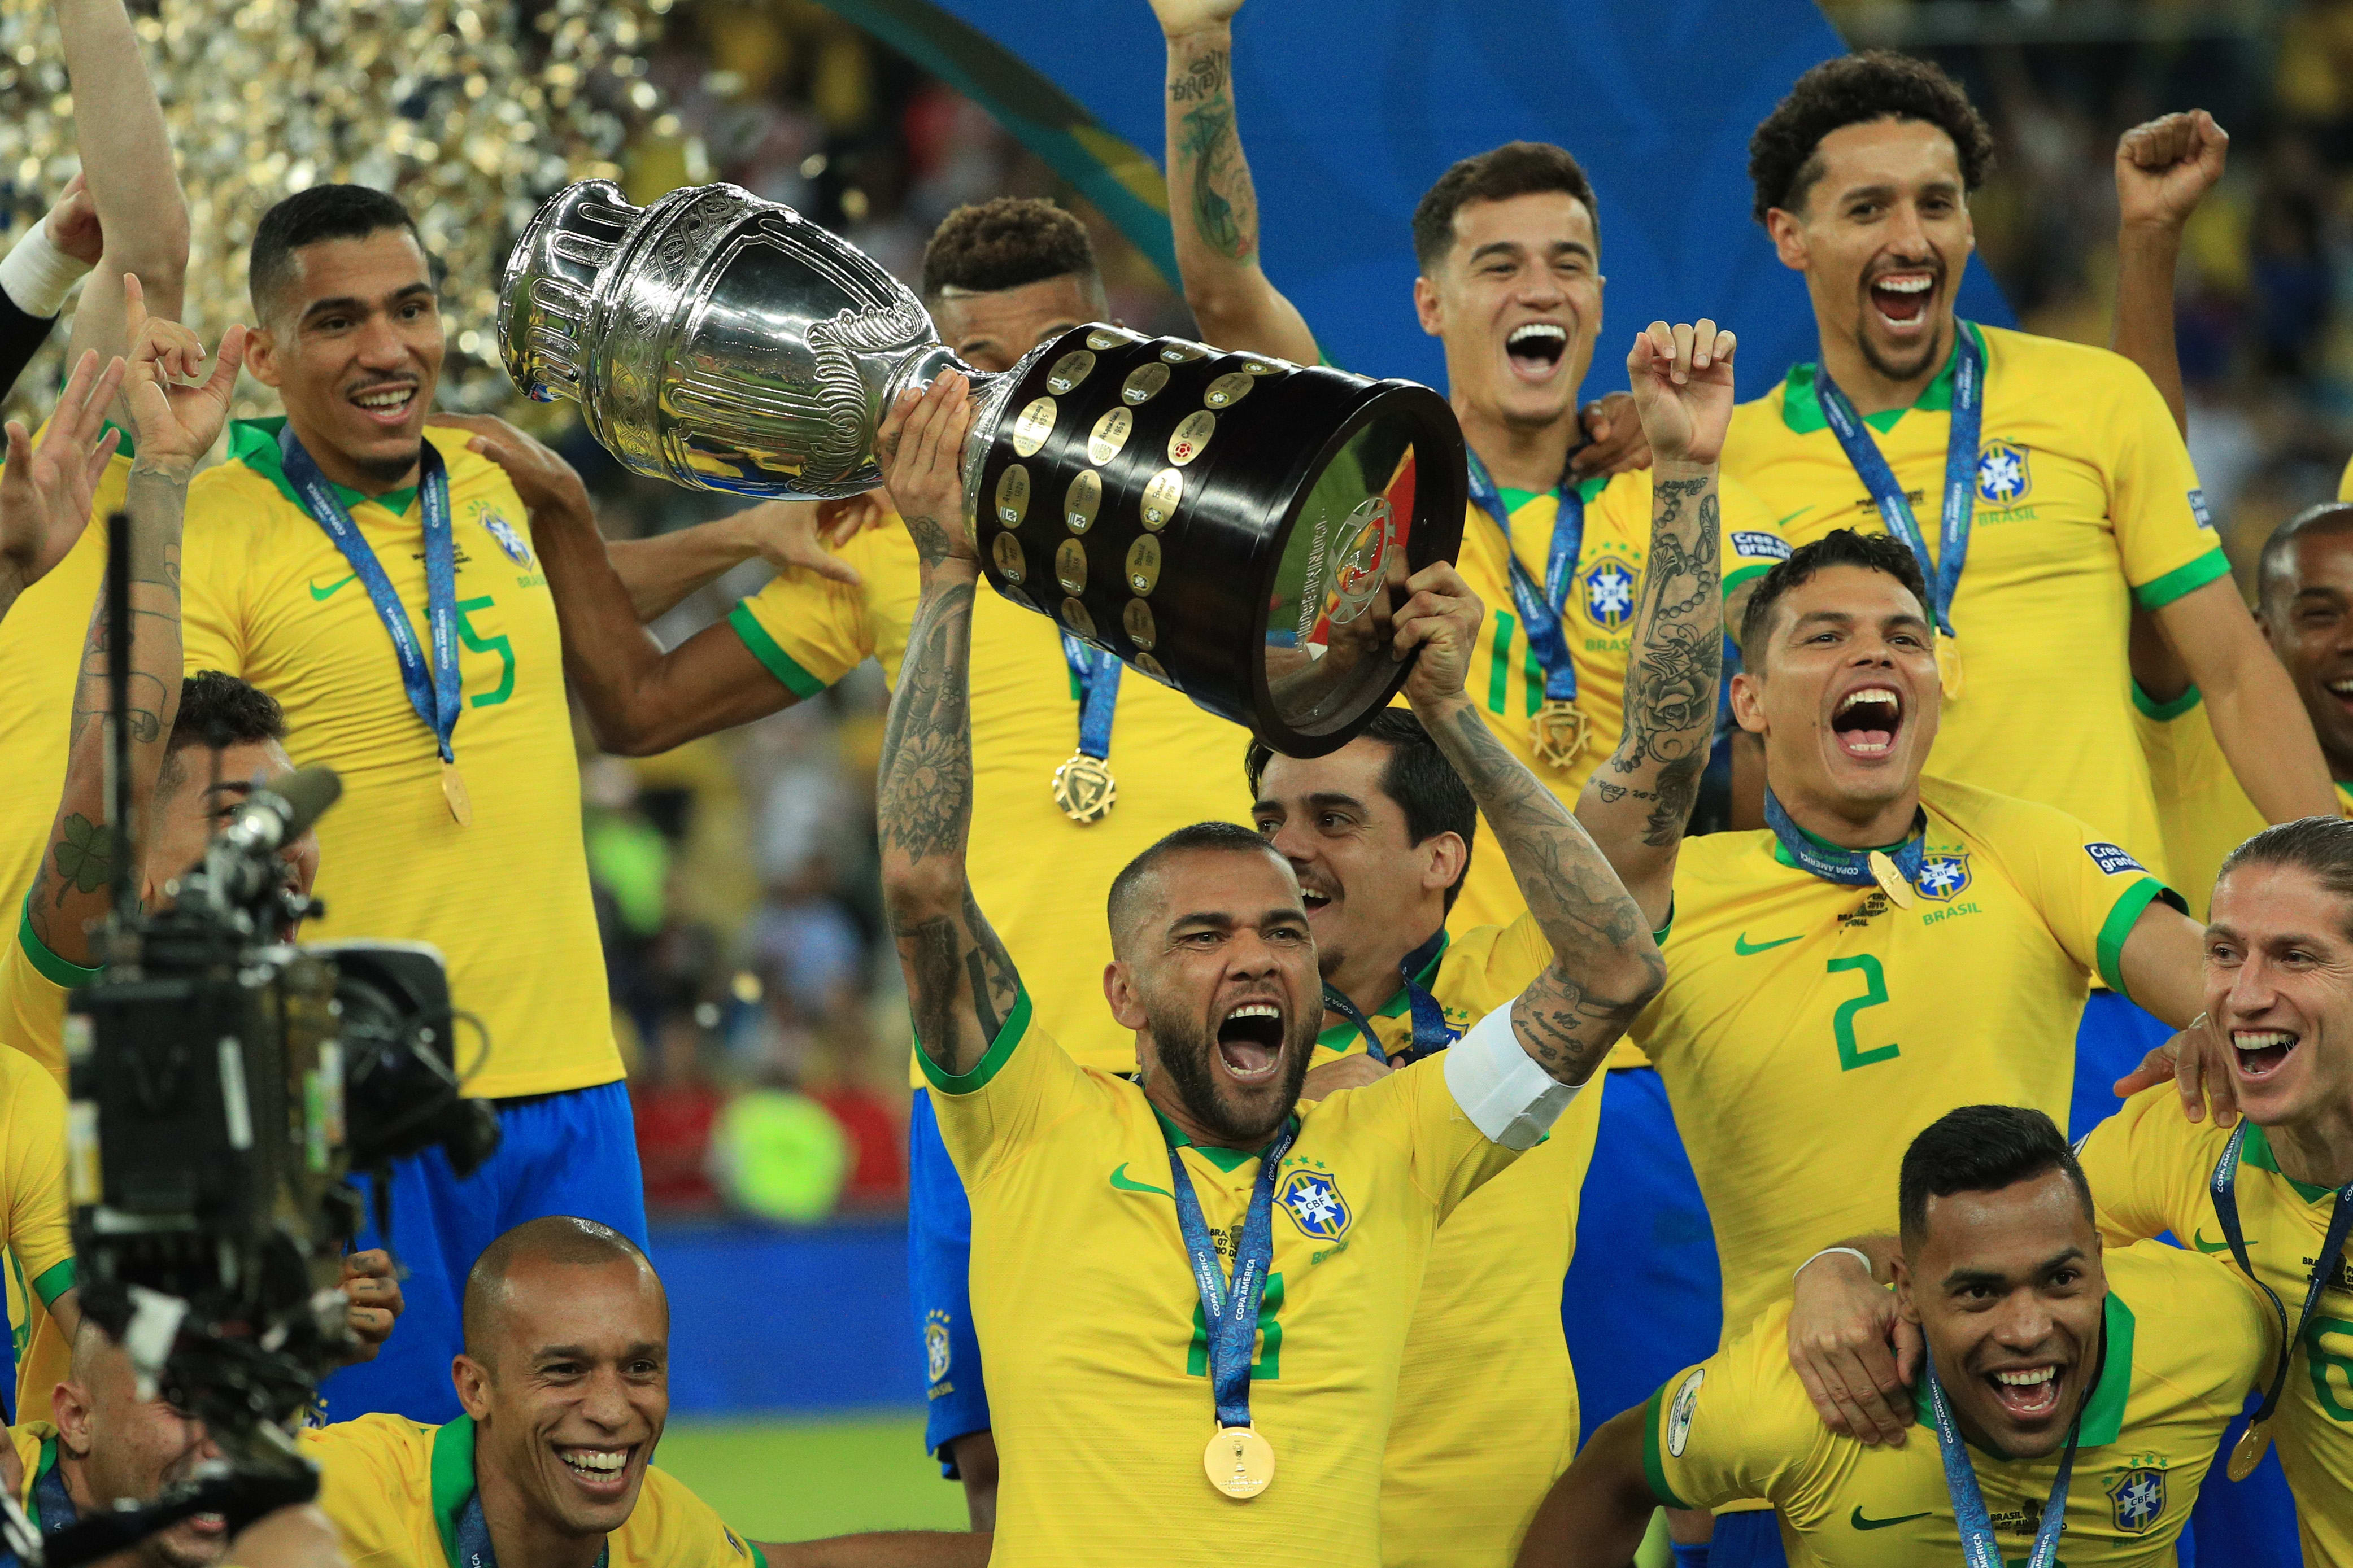 Dani Alves at FIFA World Cup: Records and stats